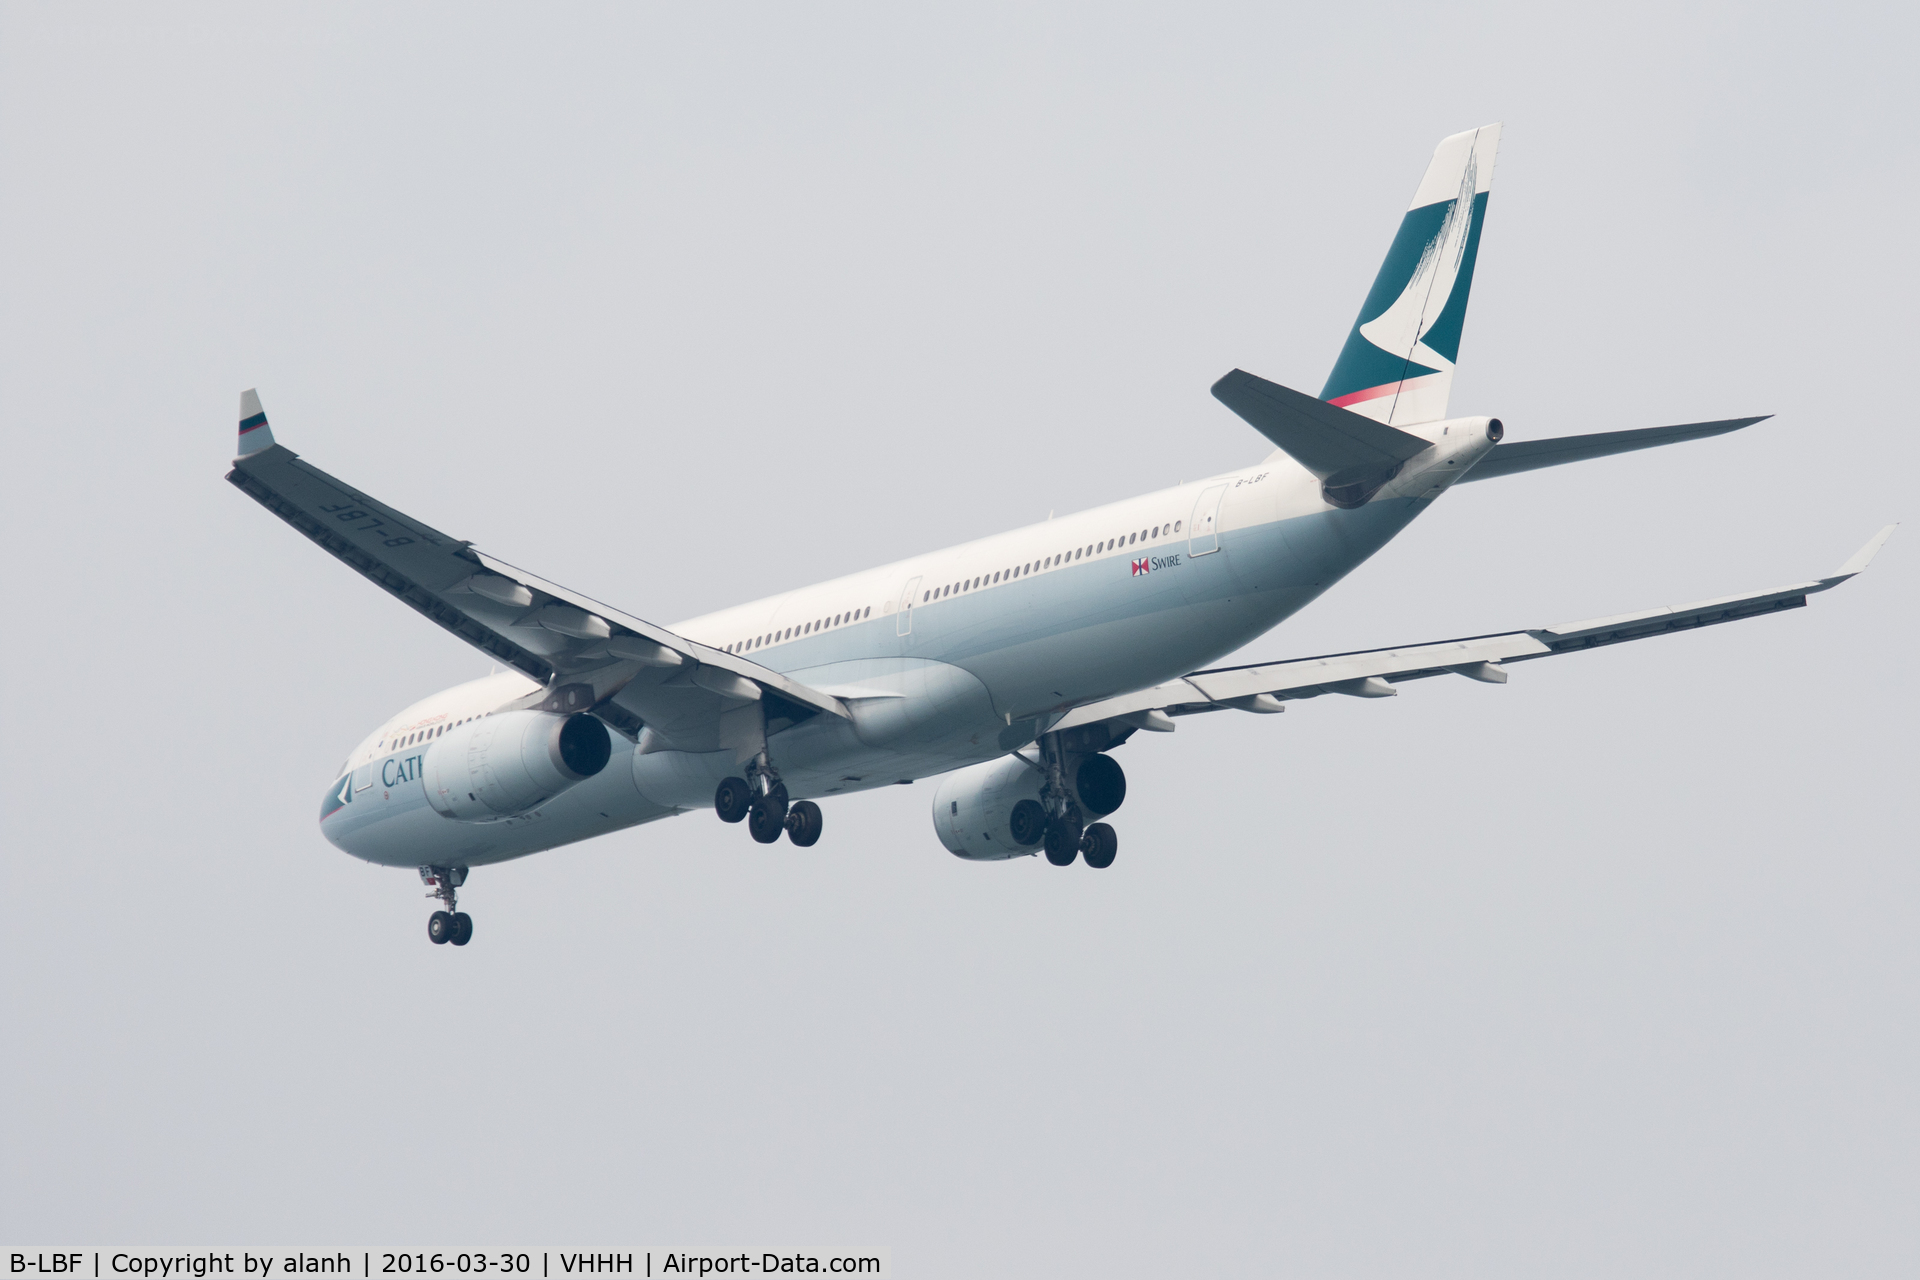 B-LBF, 2014 Airbus A330-343 C/N 1545, On finals for Hong Kong, inbound from Bangkok